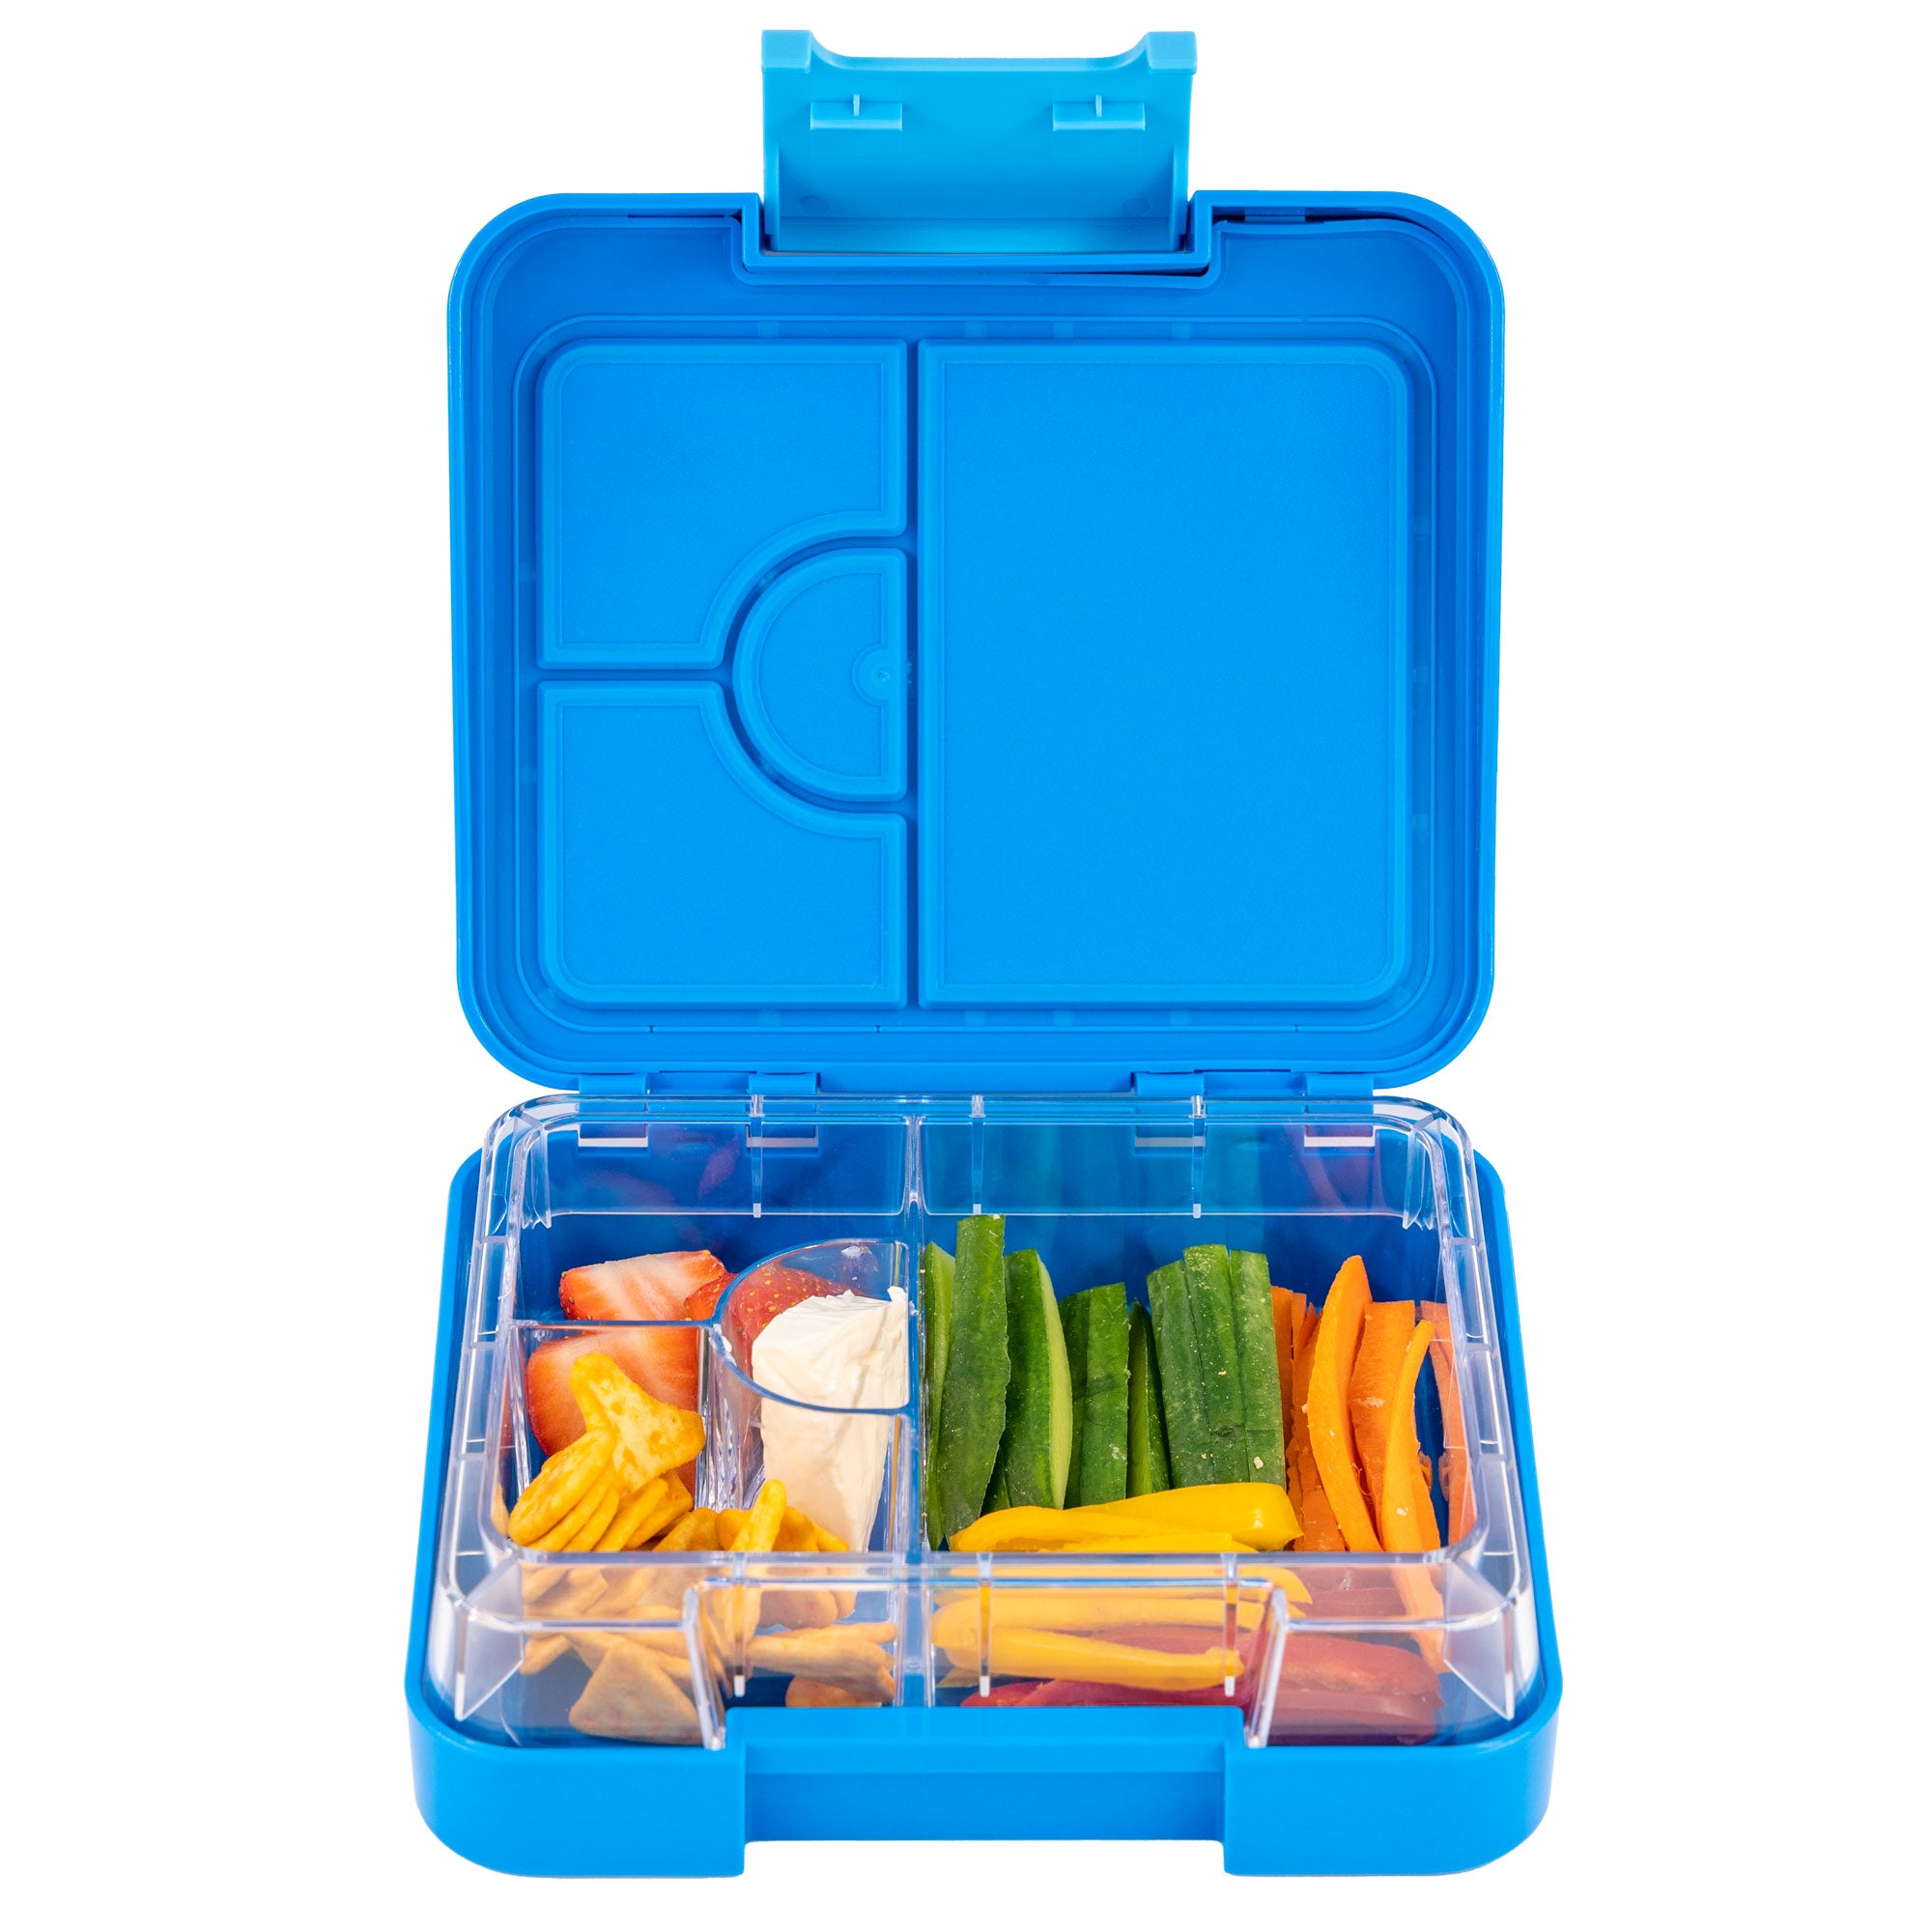 Bento Box Mini Snack Neptune Blue for kids Lunch box Food Graded Materials  BPA FREE & LEAK PROOF| Made of Triton (Neptune Blue Space man) by Snack